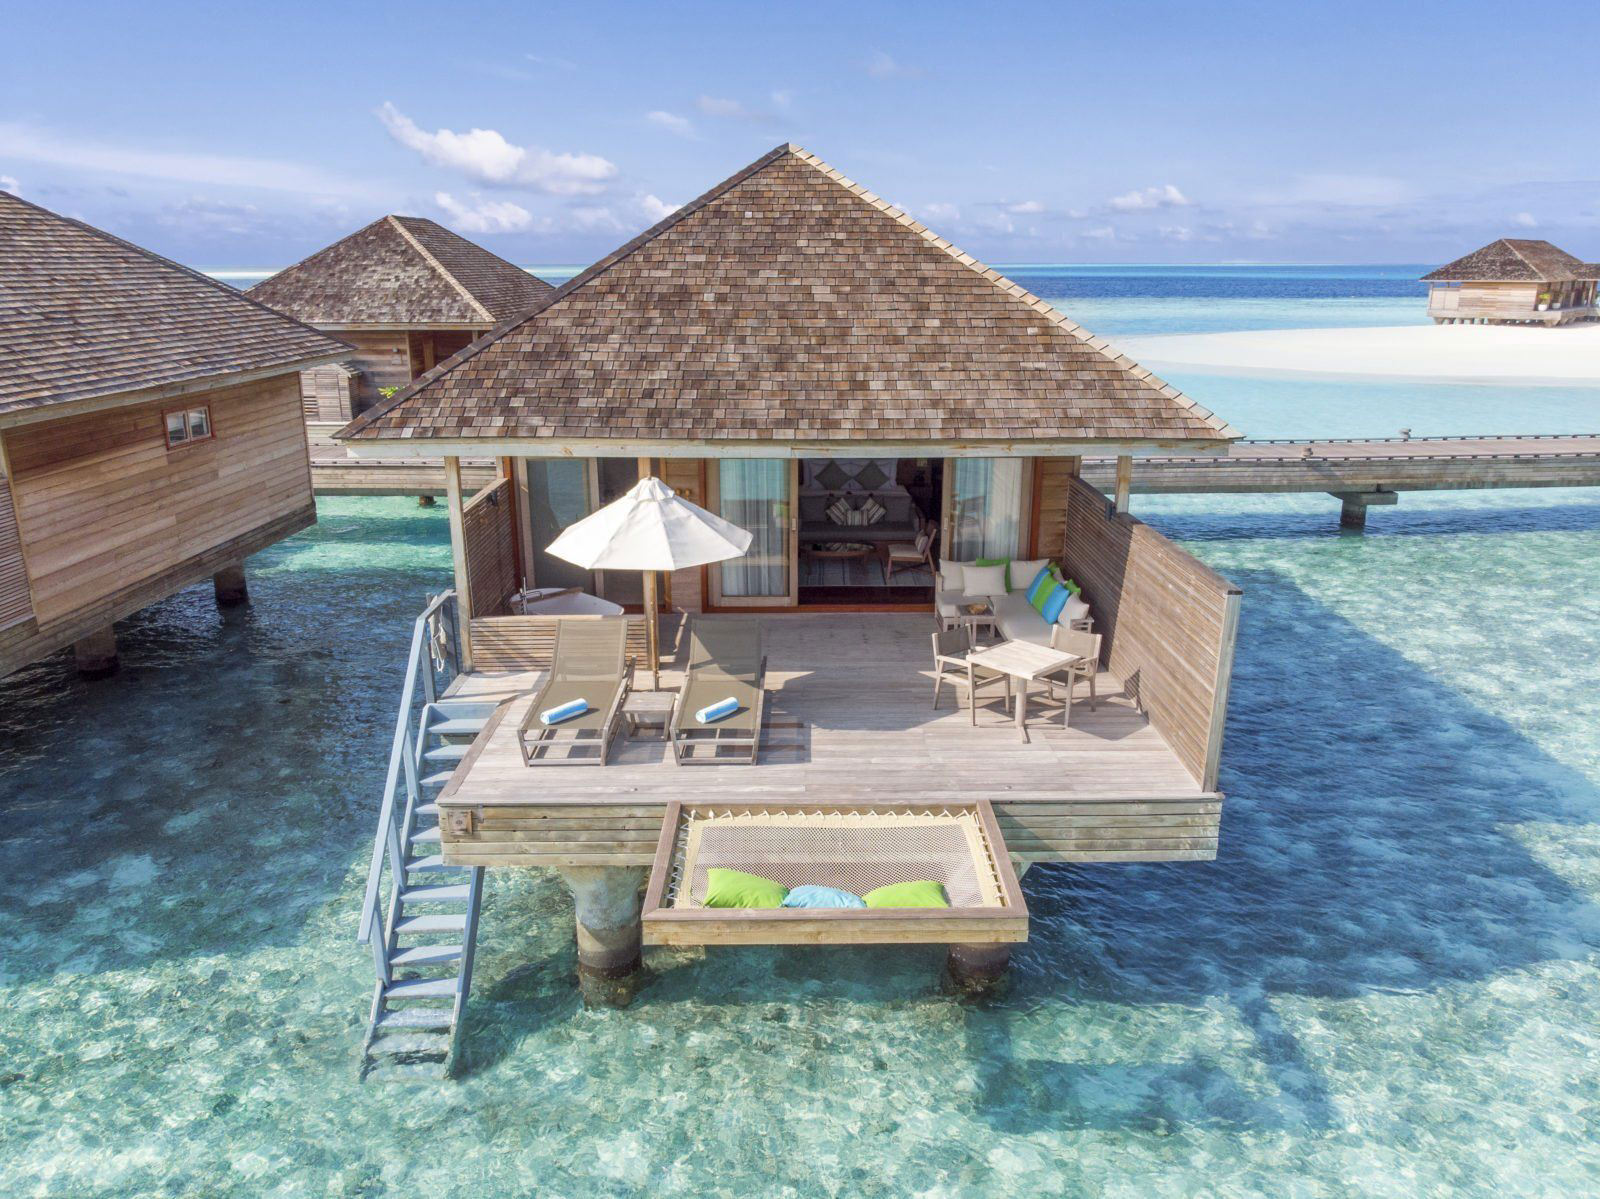 The best hotels in the Maldives to book early for this winter